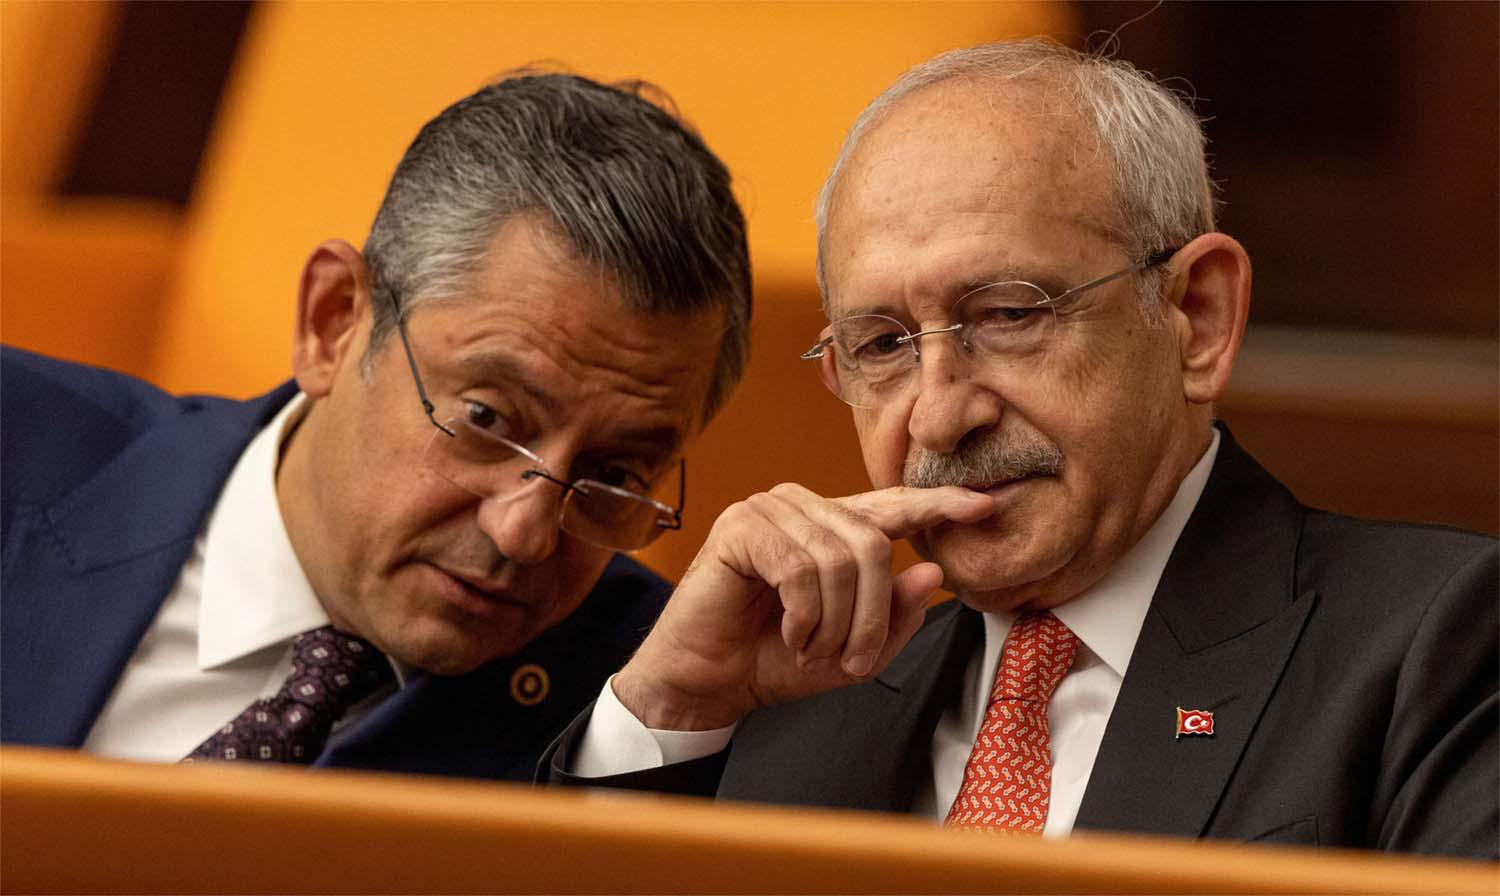 Ozel (L) says his party must repair emotional rupture with voters